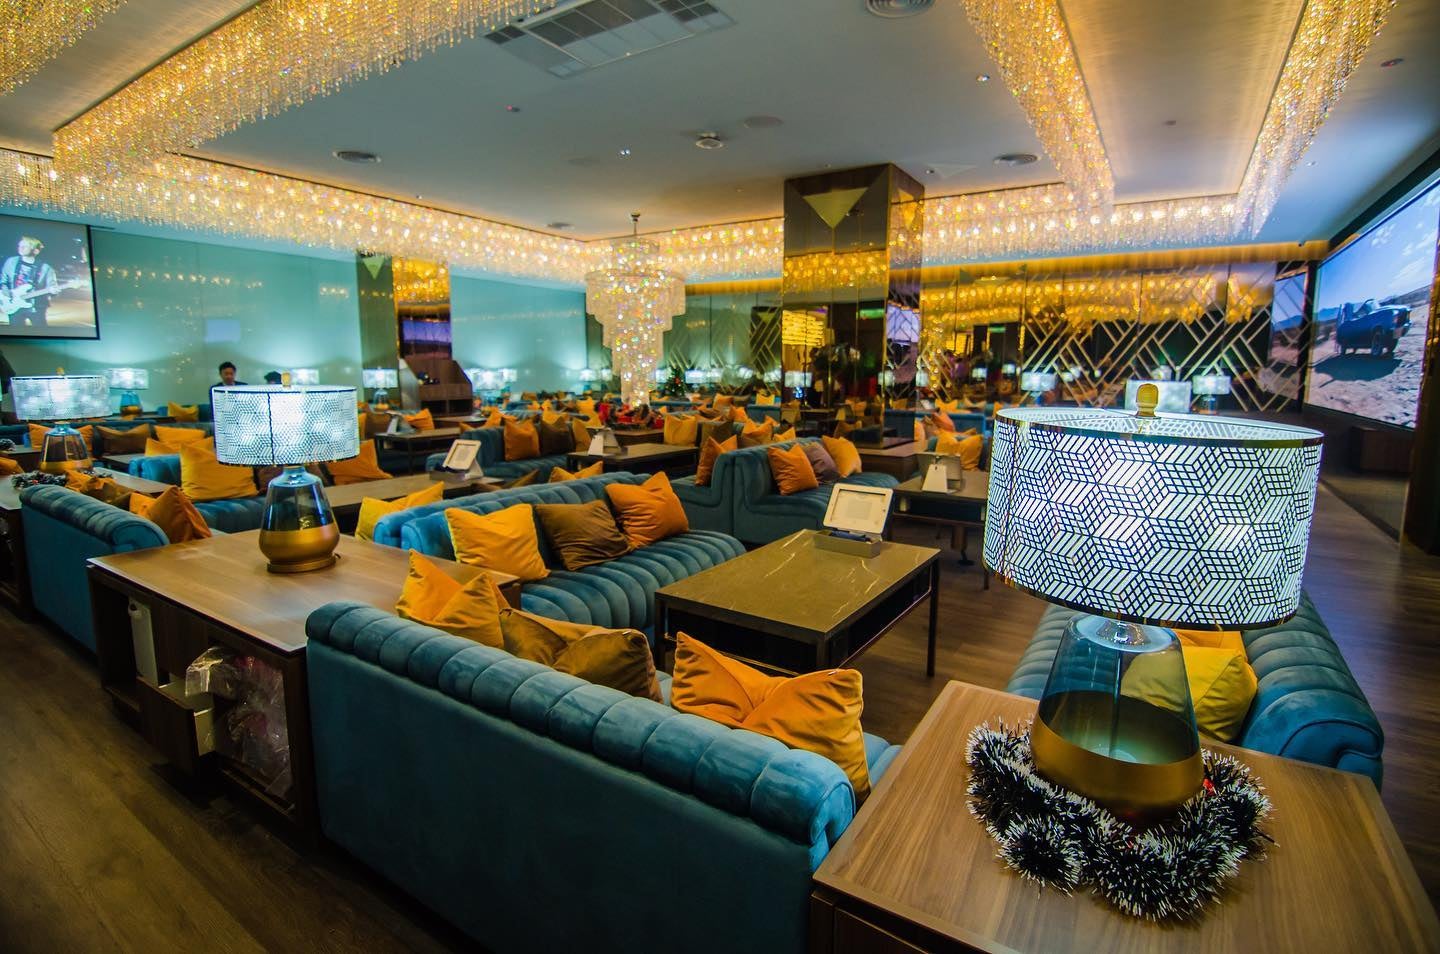 With Complimentary Food And Drinks, The World's FIRST Social Lounge is Now in Malaysia! - WORLD OF BUZZ 1